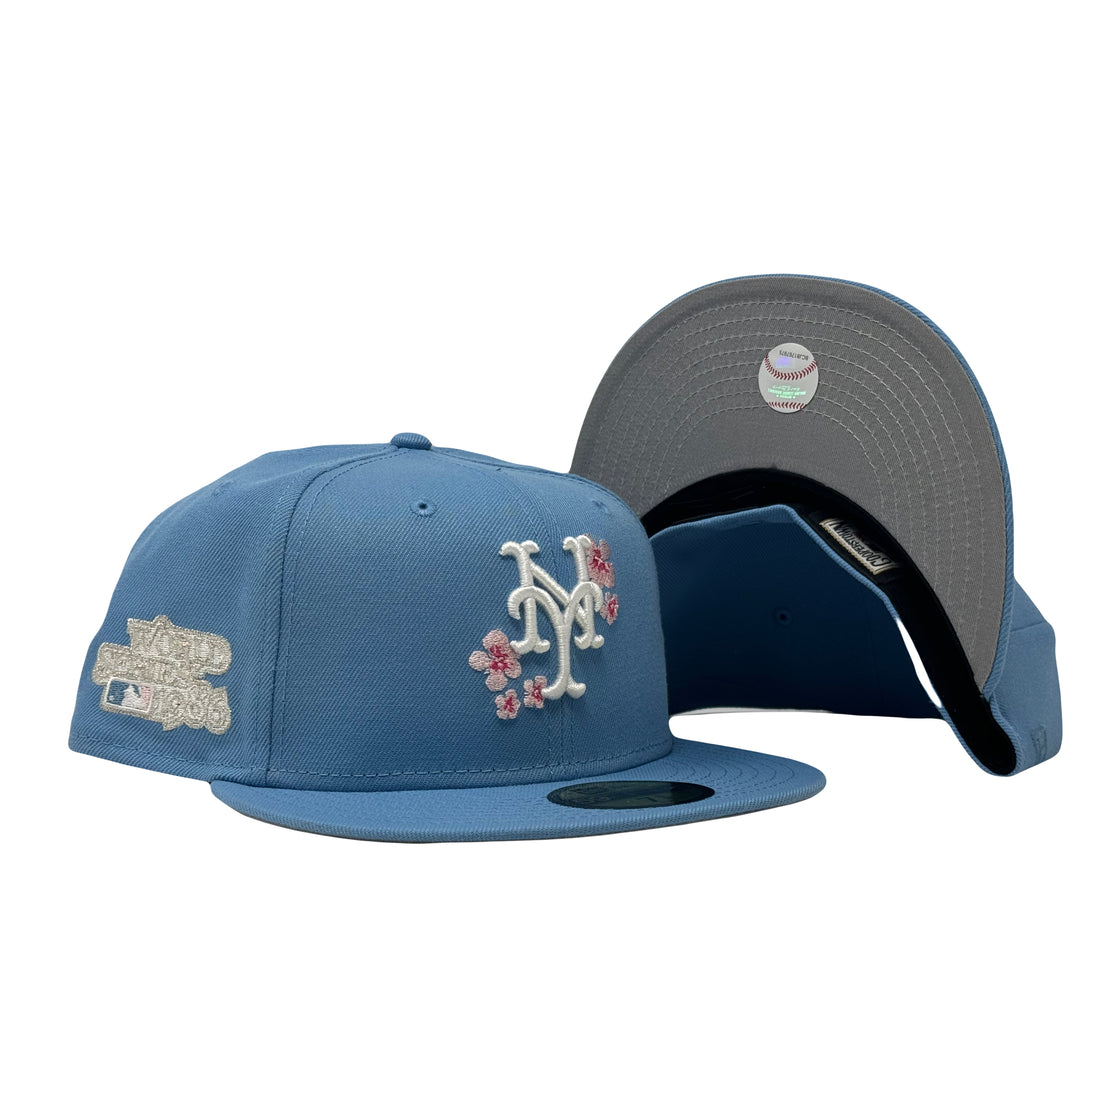 New York Mets 1986 World Series Cherry Blossom Pack Sky Blue 59Fifty New Era Fitted Hat